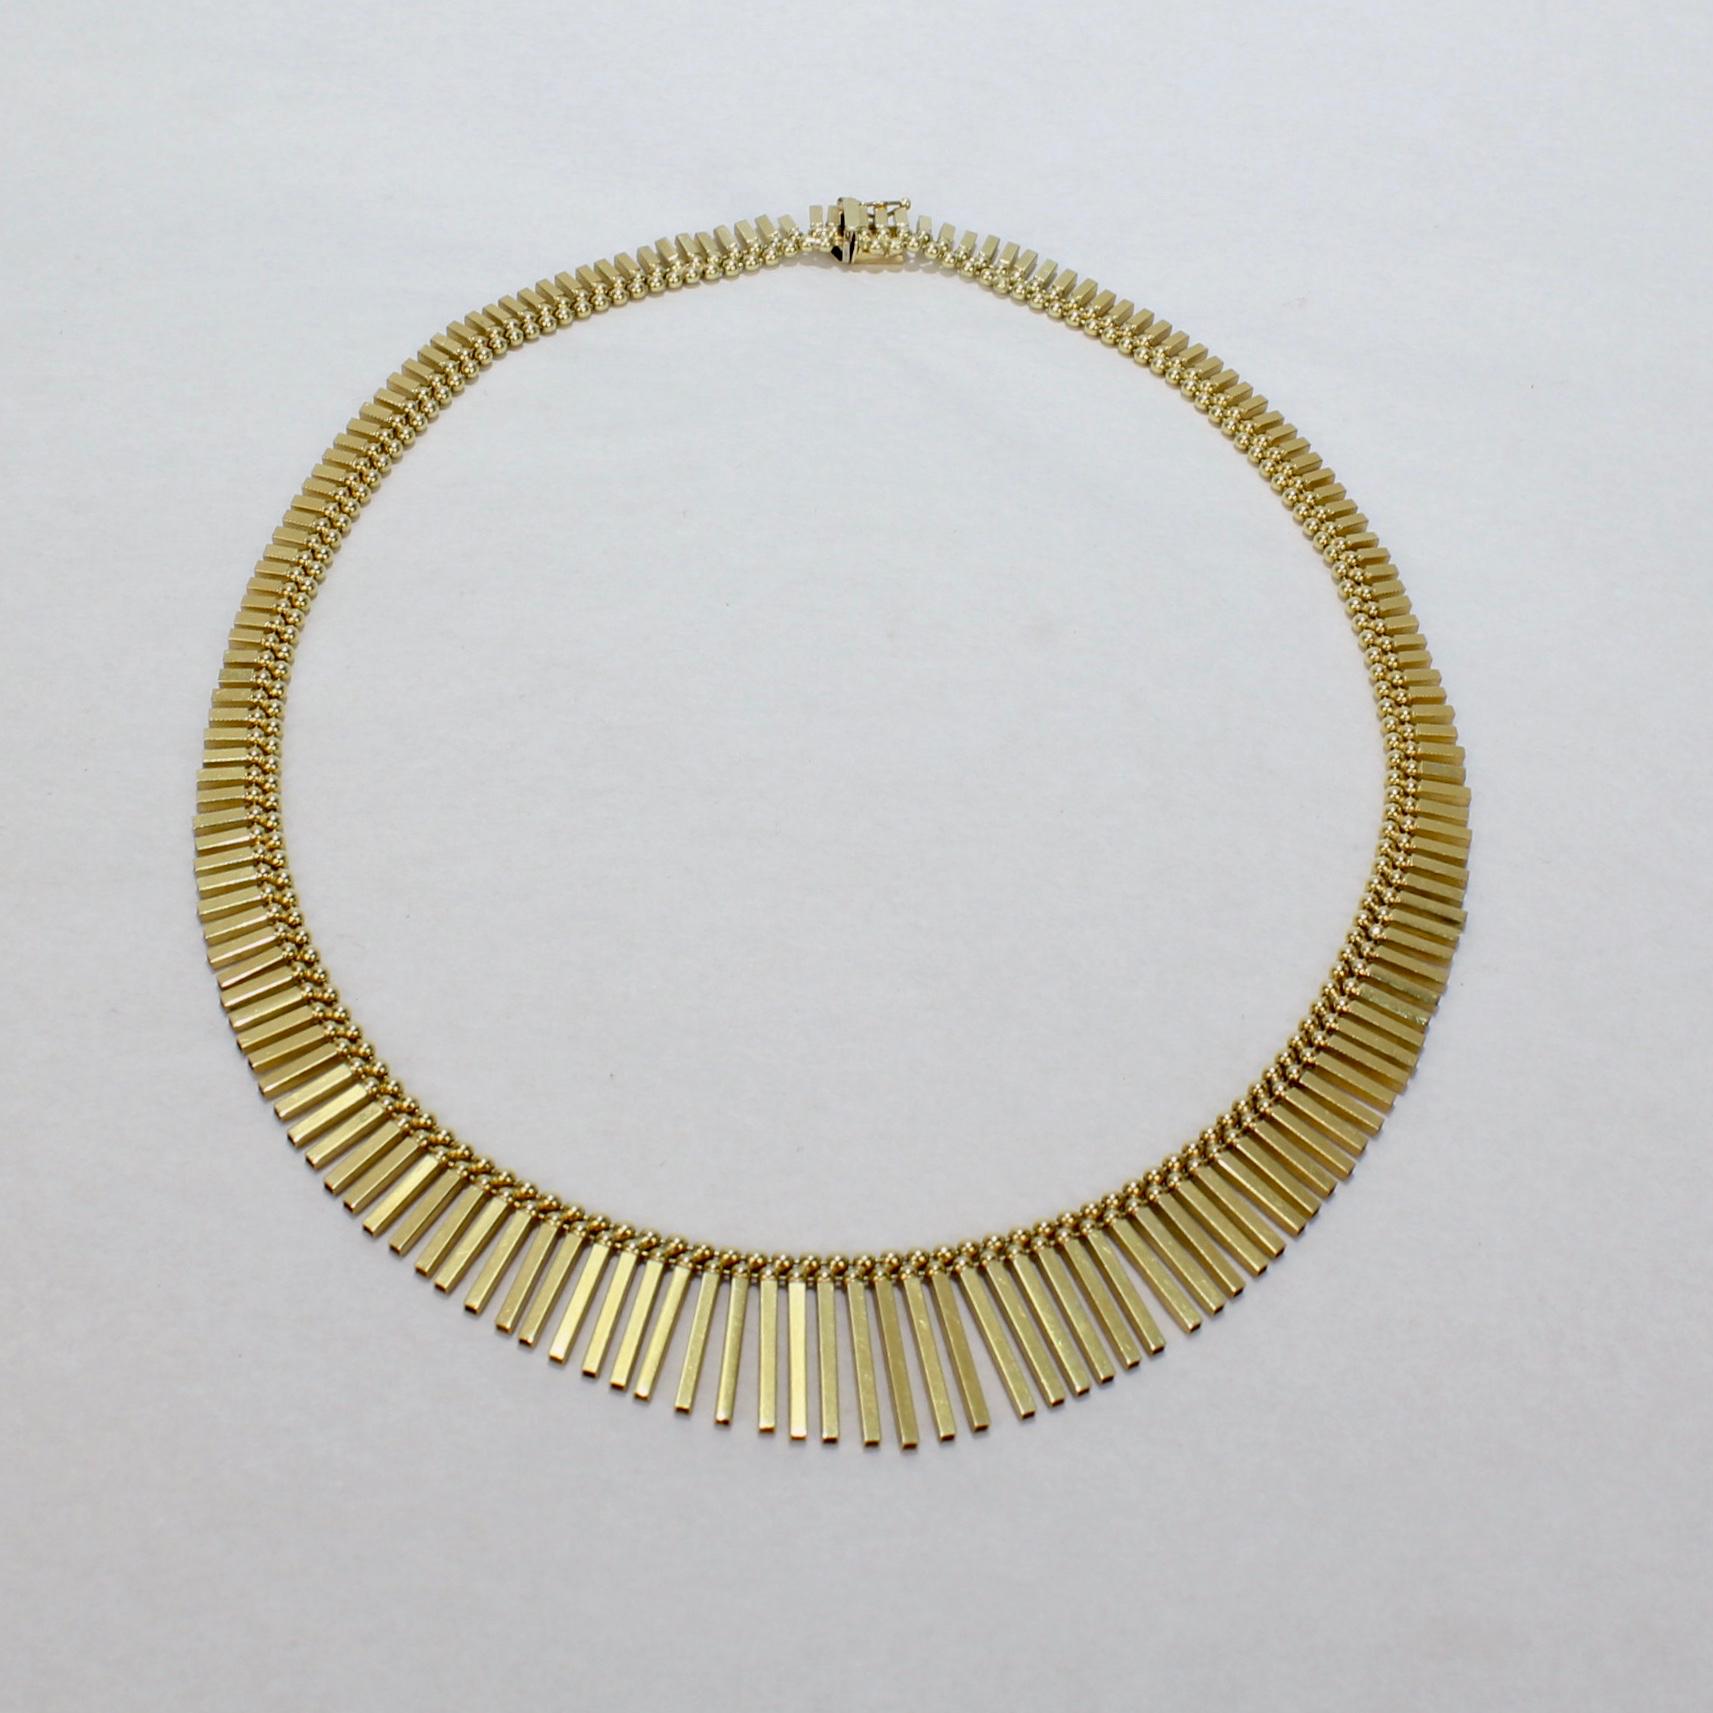 A wonderful graduated Fringe necklace by UnoAErre.

In 14K gold with graduated, alternating polished and textured open-ended rods suspended from a double strand of beads.

UnoAErre Italia is a renowned goldsmith and jeweler based in Arezzo, Italy.